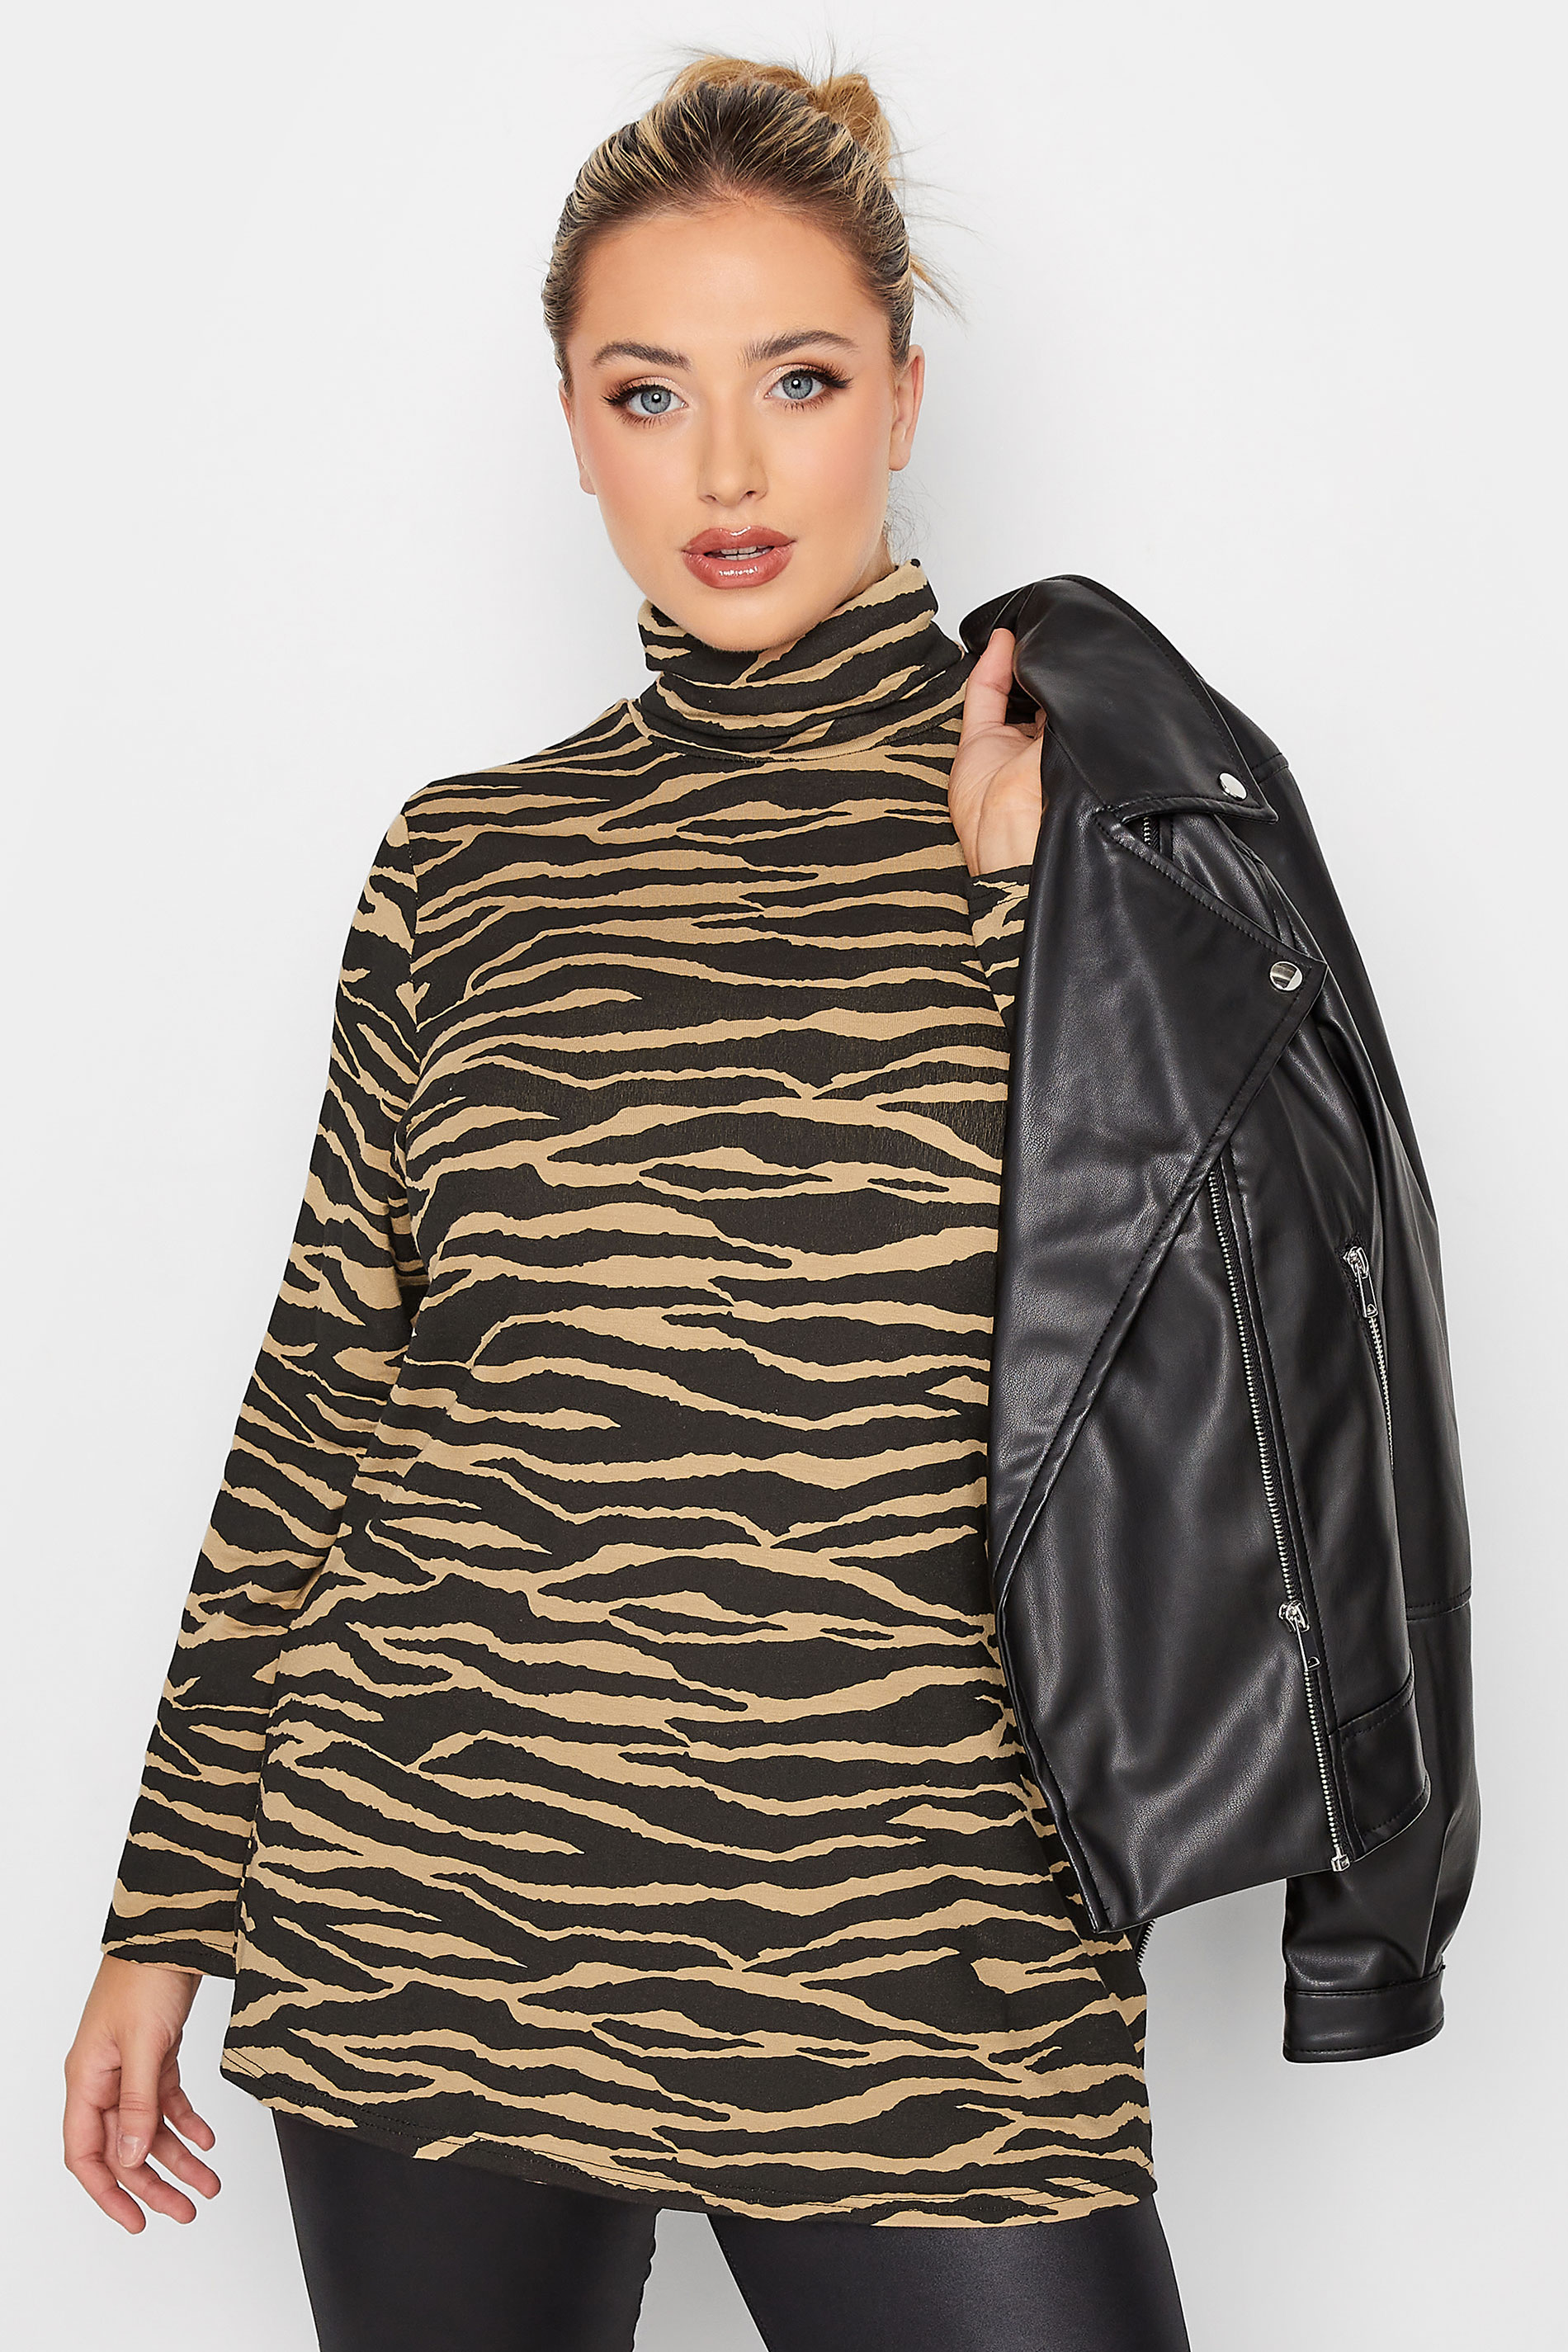 LIMITED COLLECTION Plus Size Black & Brown Zebra Print Turtle Neck Top | Yours Clothing 1